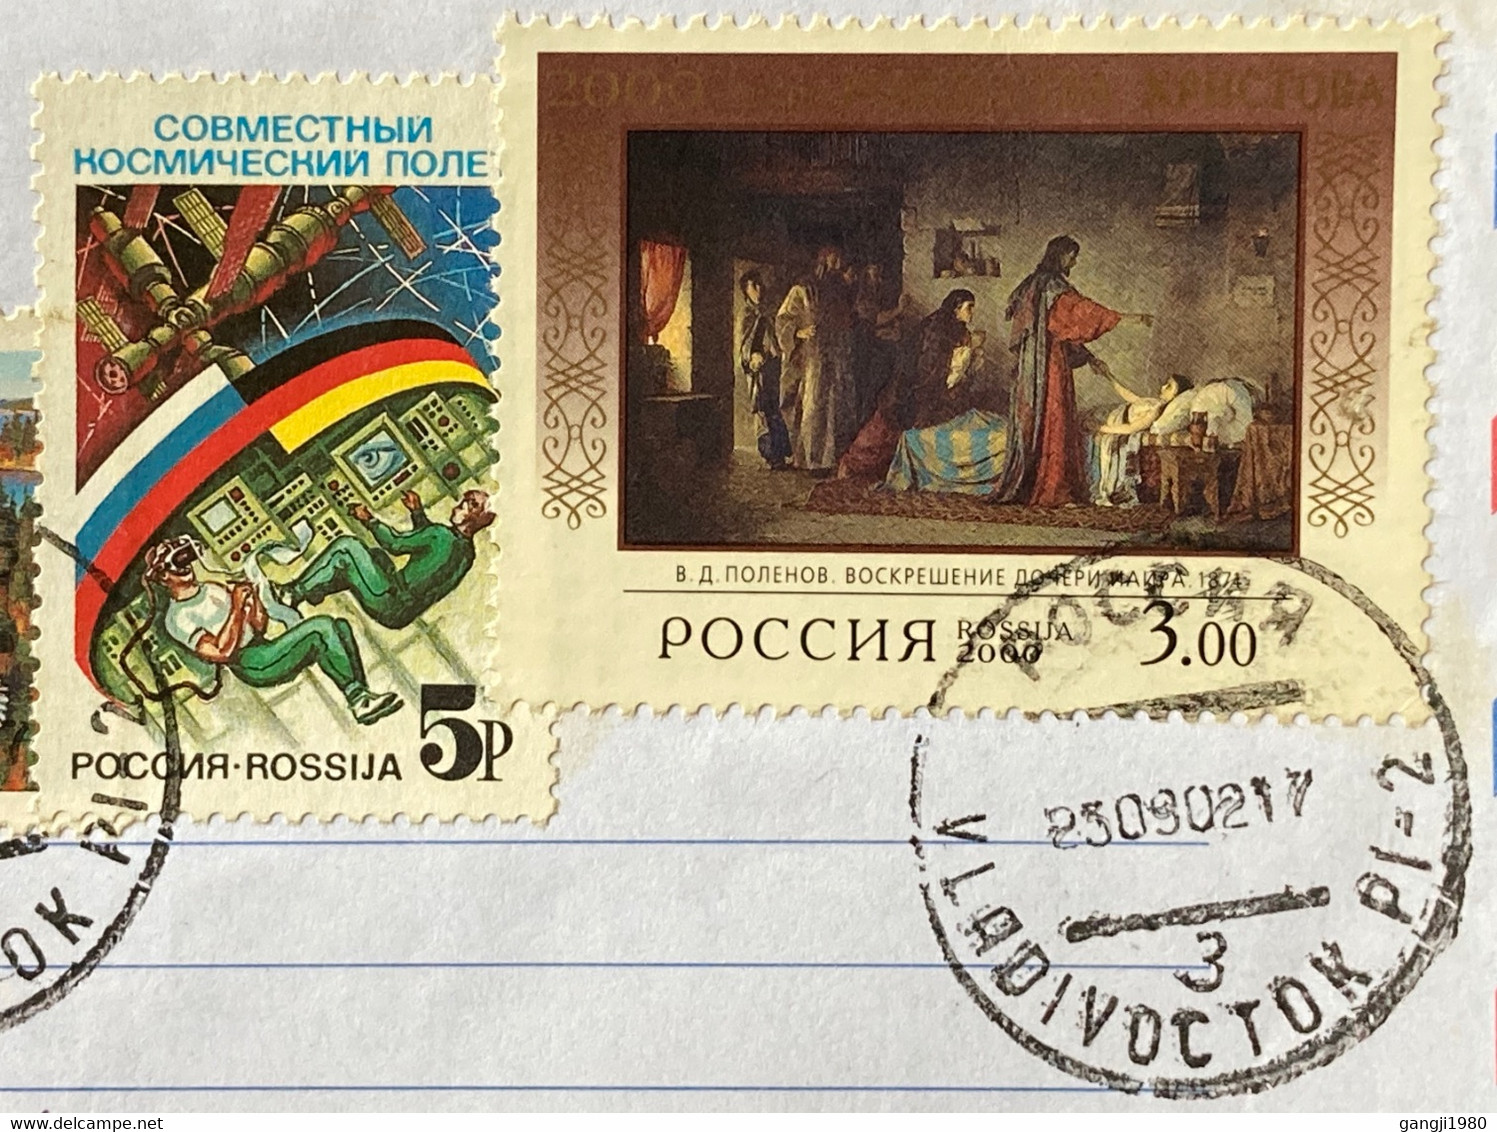 RUSSIA,2002,USED COVER TO INDIA,5 STAMPS,BIRD,SPACE,WALK,ASTRONAUT,ART,PAINTING, VLADIVOSTOK CITY CANCELLATION. - Briefe U. Dokumente